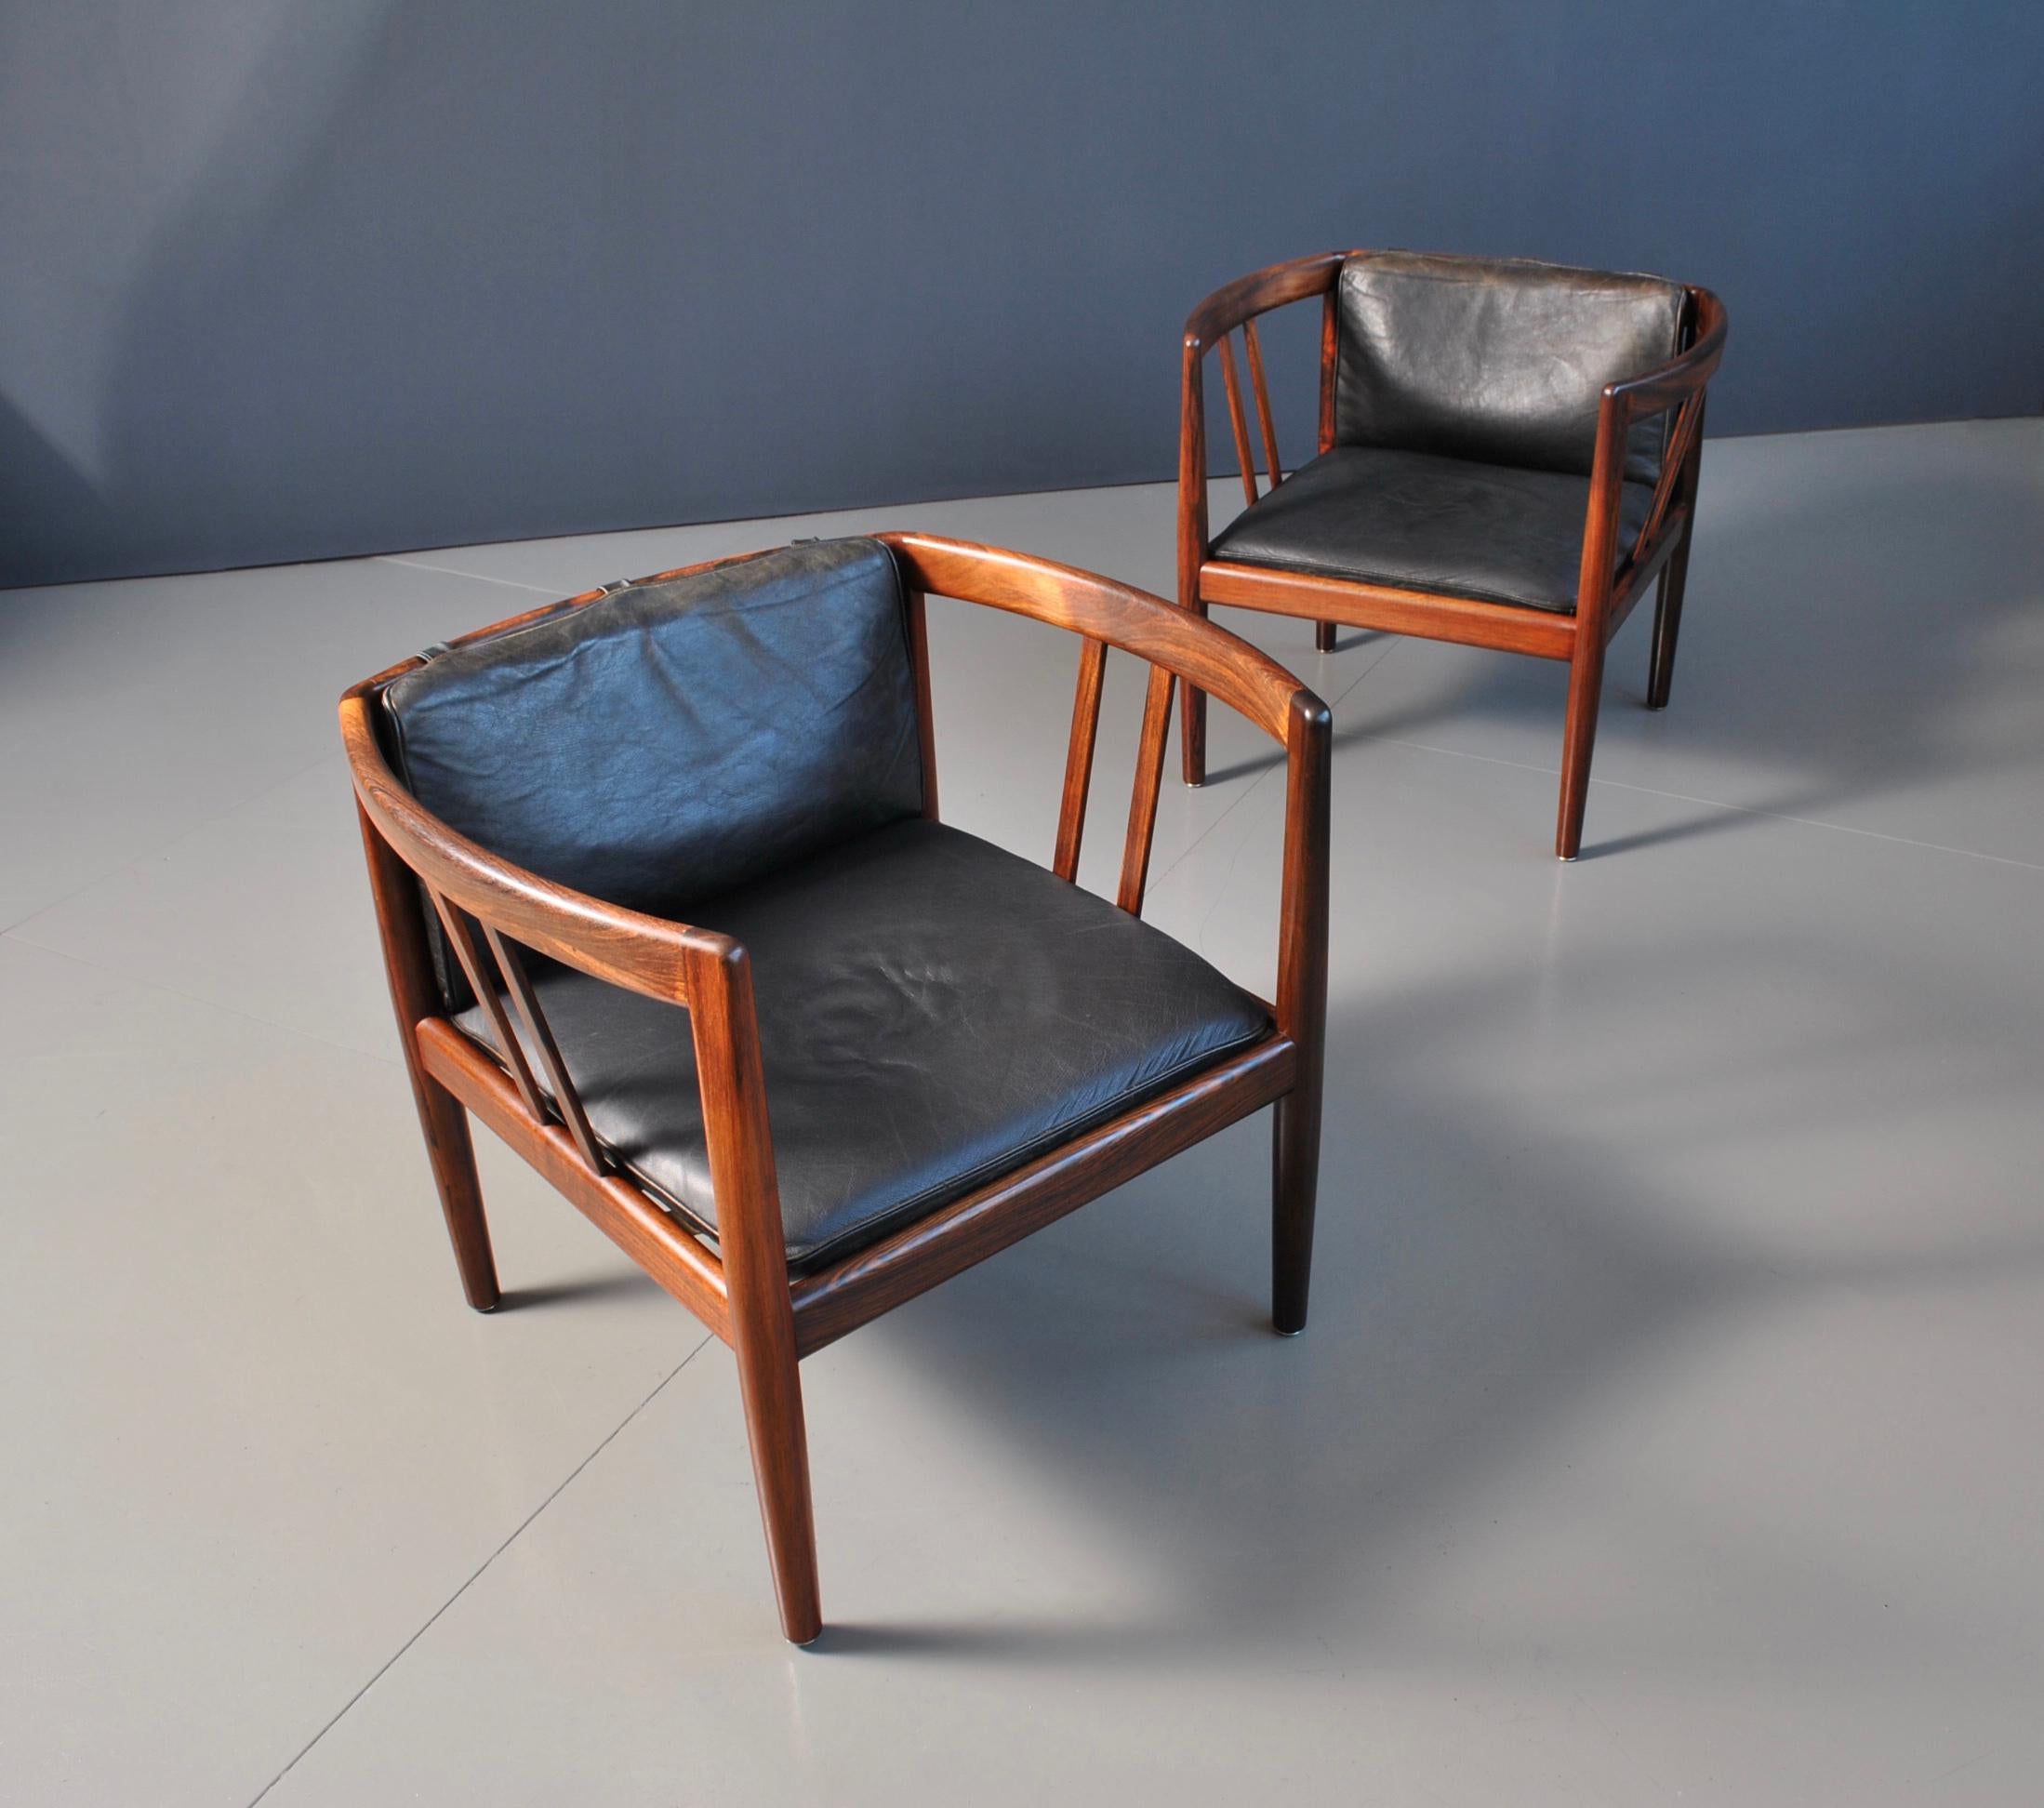 A pair of extremely rare Danish lounge chairs designed by Illum Wikkelsø for Holger Christiansen, Denmark circa 1960. These superb low profile armchairs are wonderful examples of Wikkelsø’s design genius. Fantastic craftsmanship from Holger